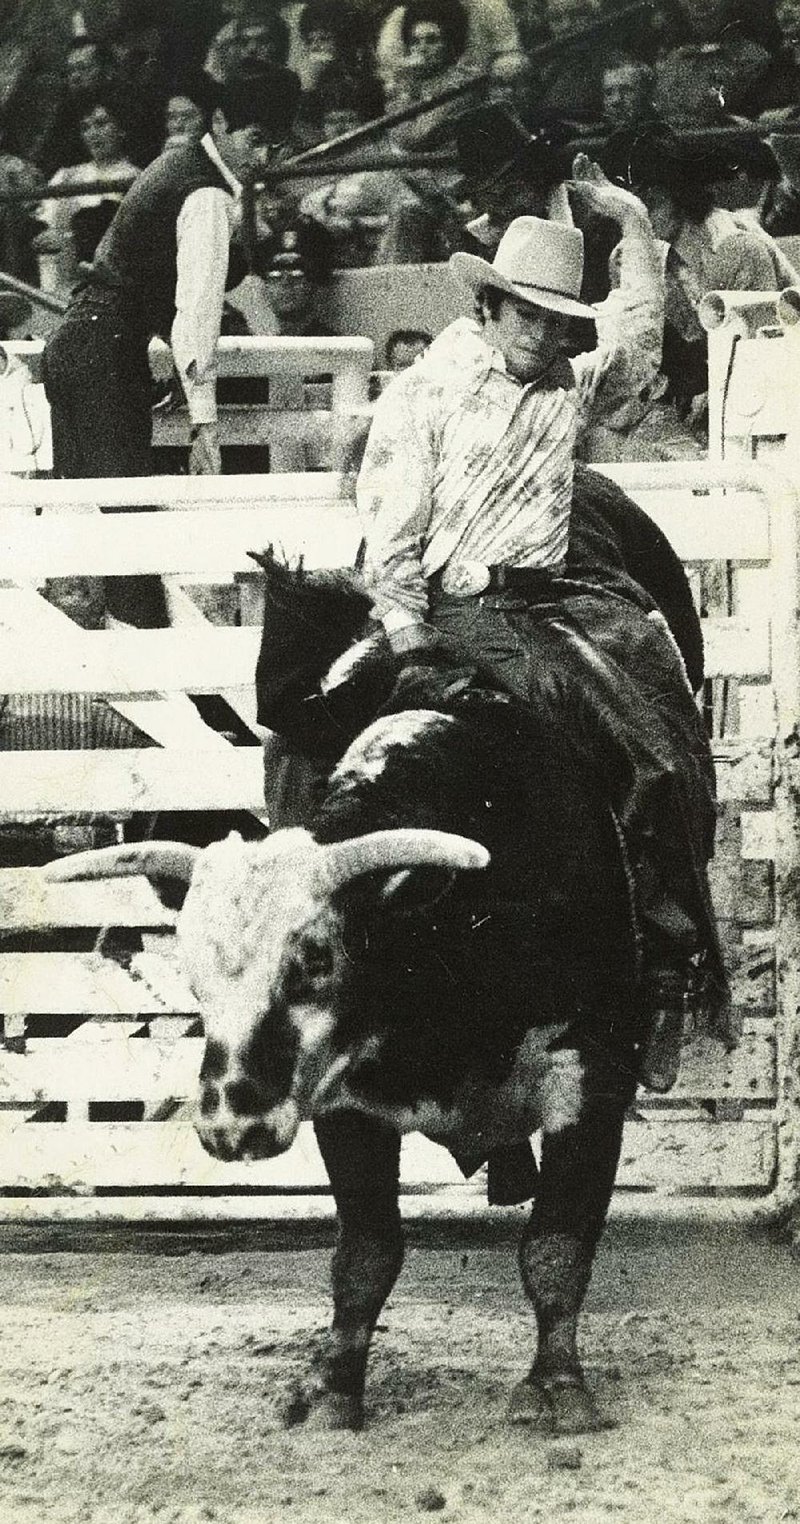 Denny Flynn, seen here in 1974, remains the most decorated bull rider from the state of Arkansas. He will join the Arkansas Sports Hall of Fame as a 2019 inductee.